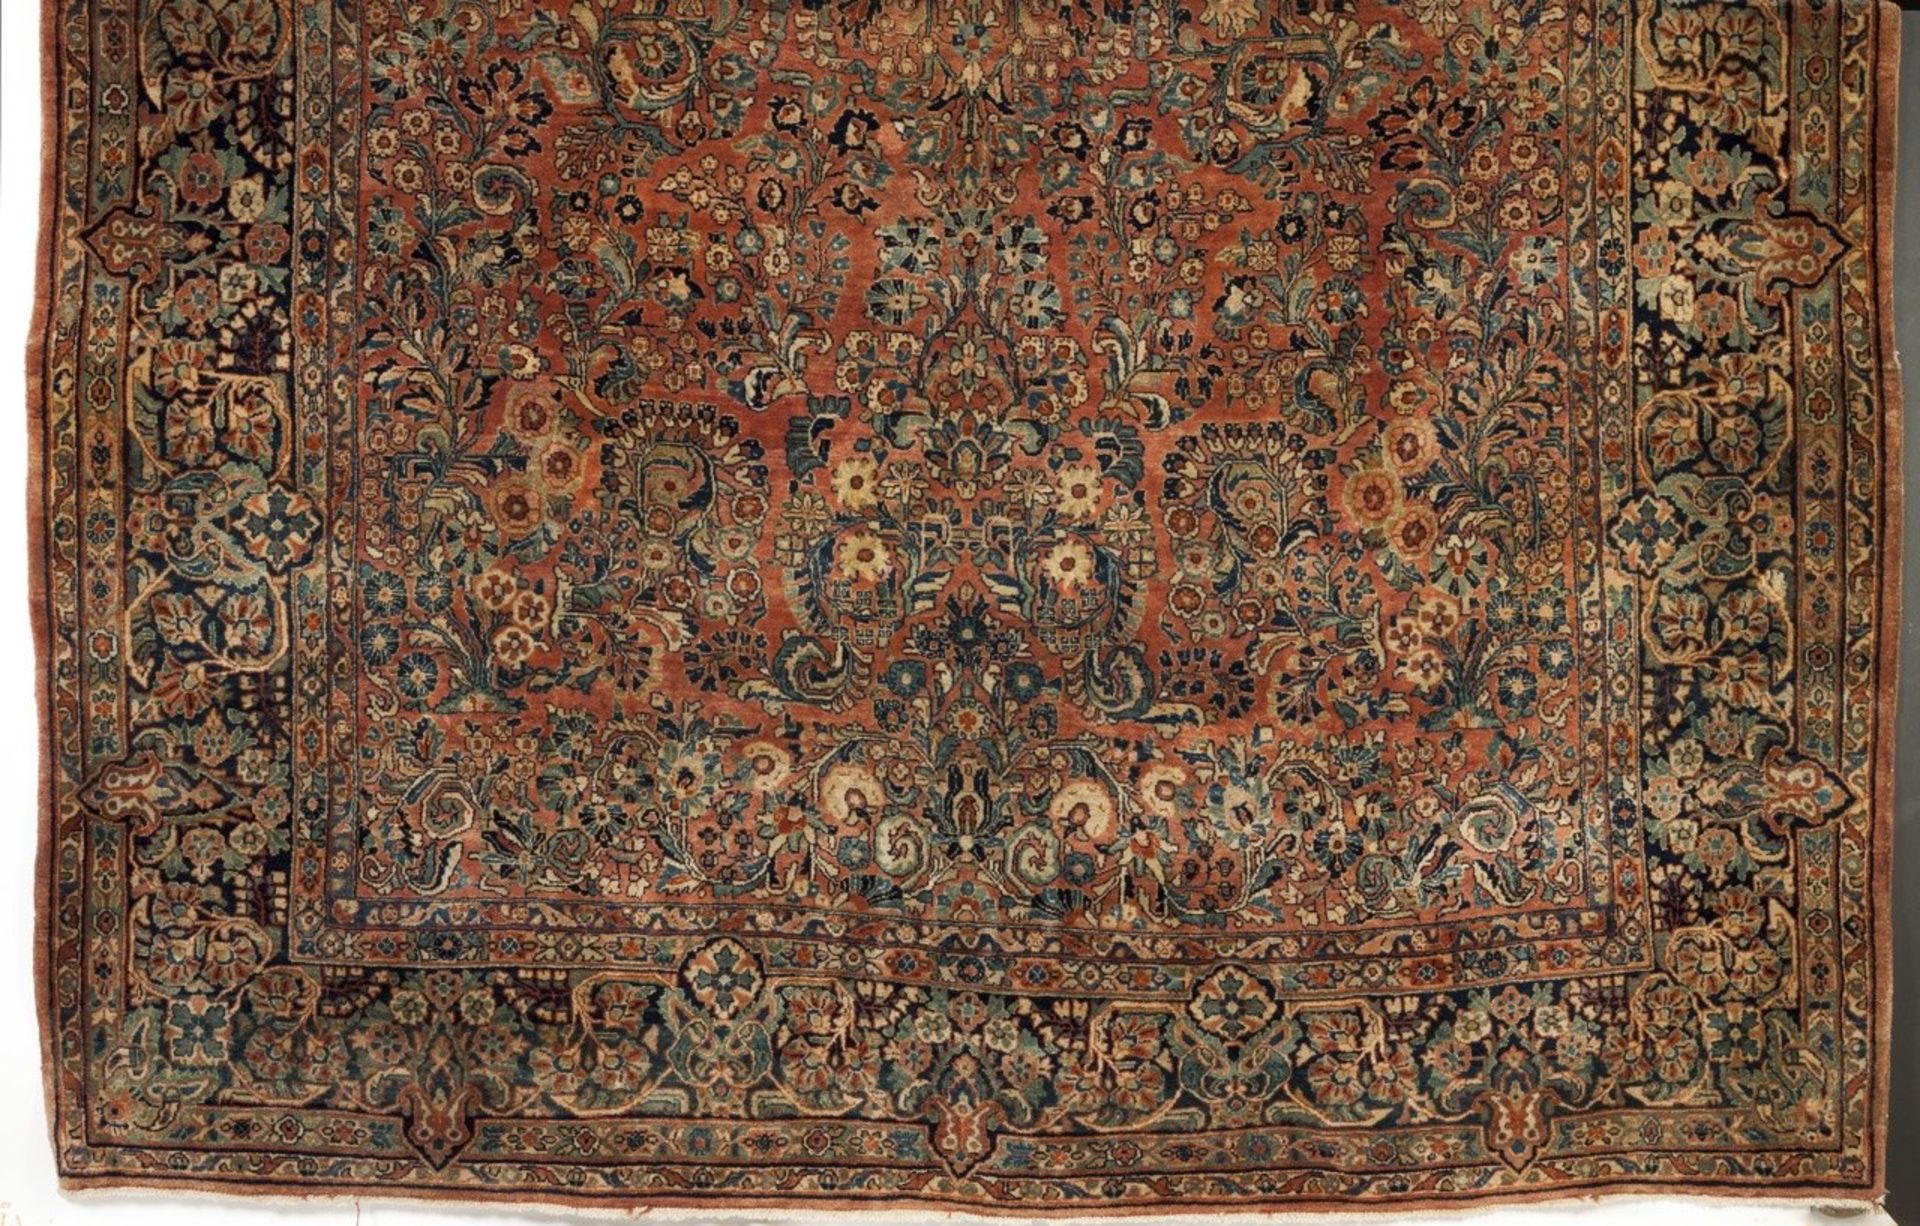 A Turkish carpet  Cotton and wool  Geometric decoration in ocher and blue    250x180 cm